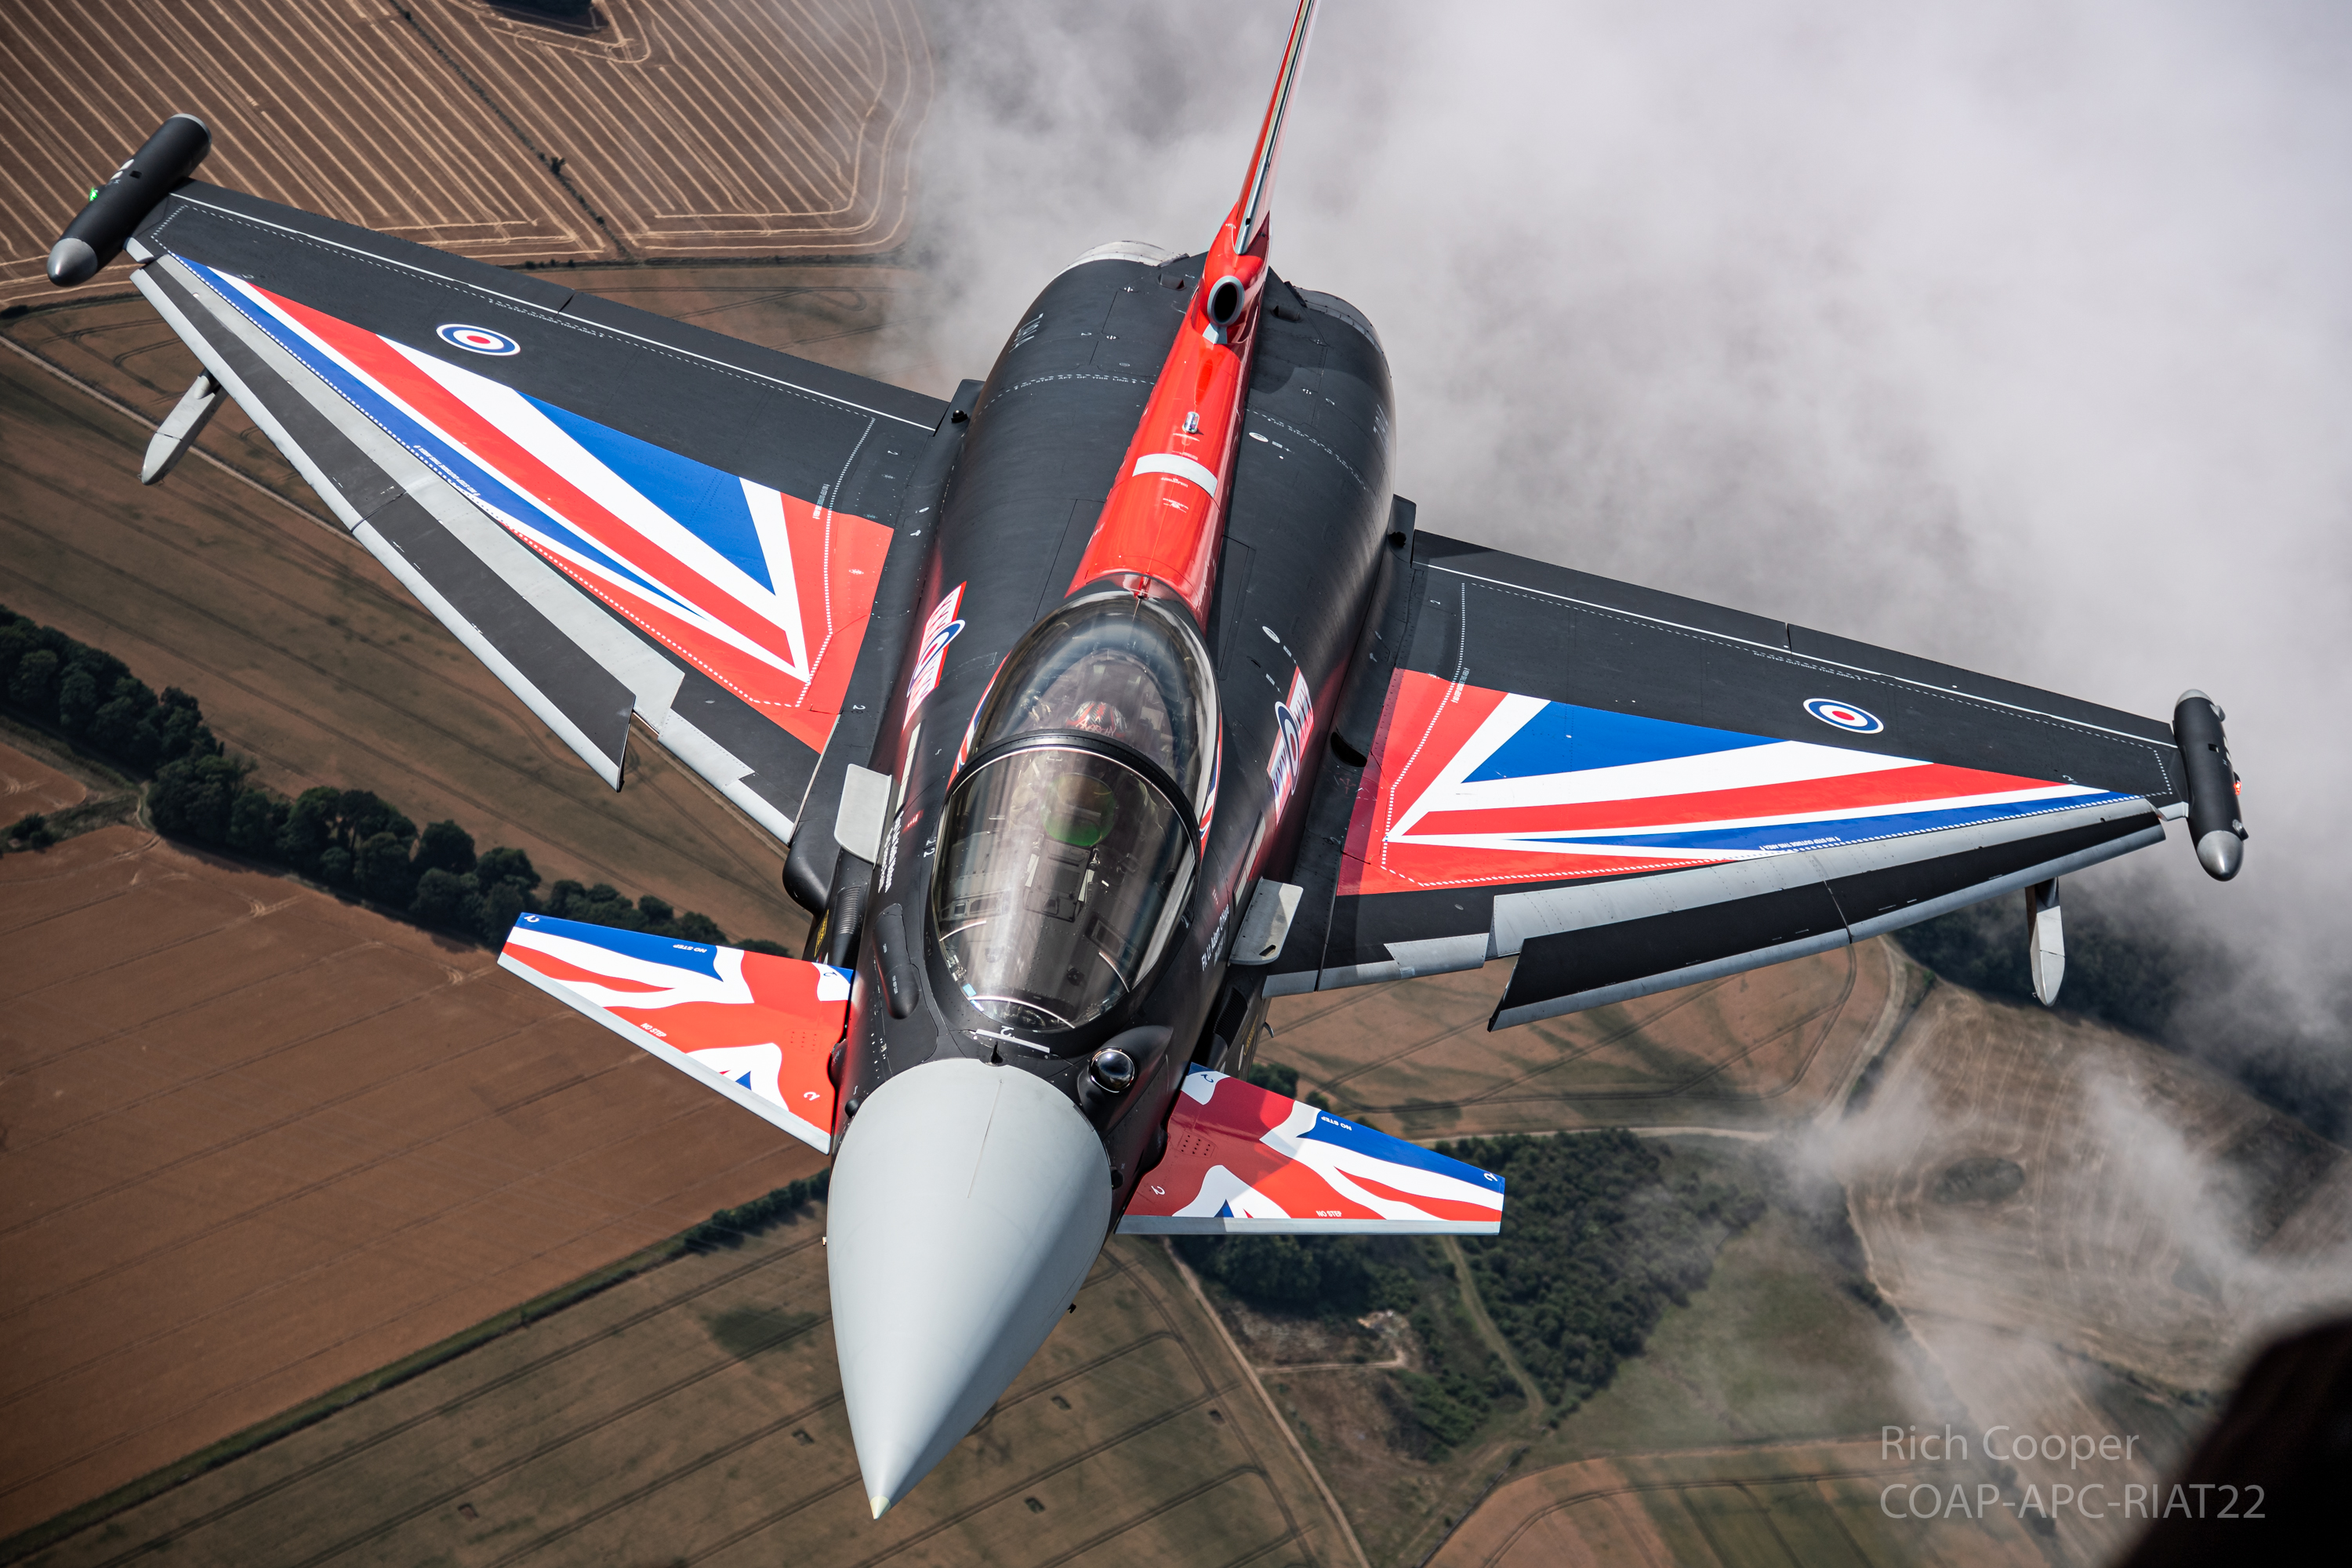 Image shows Blackjack Typhoon FGR4 in flight, with union jack body paint.